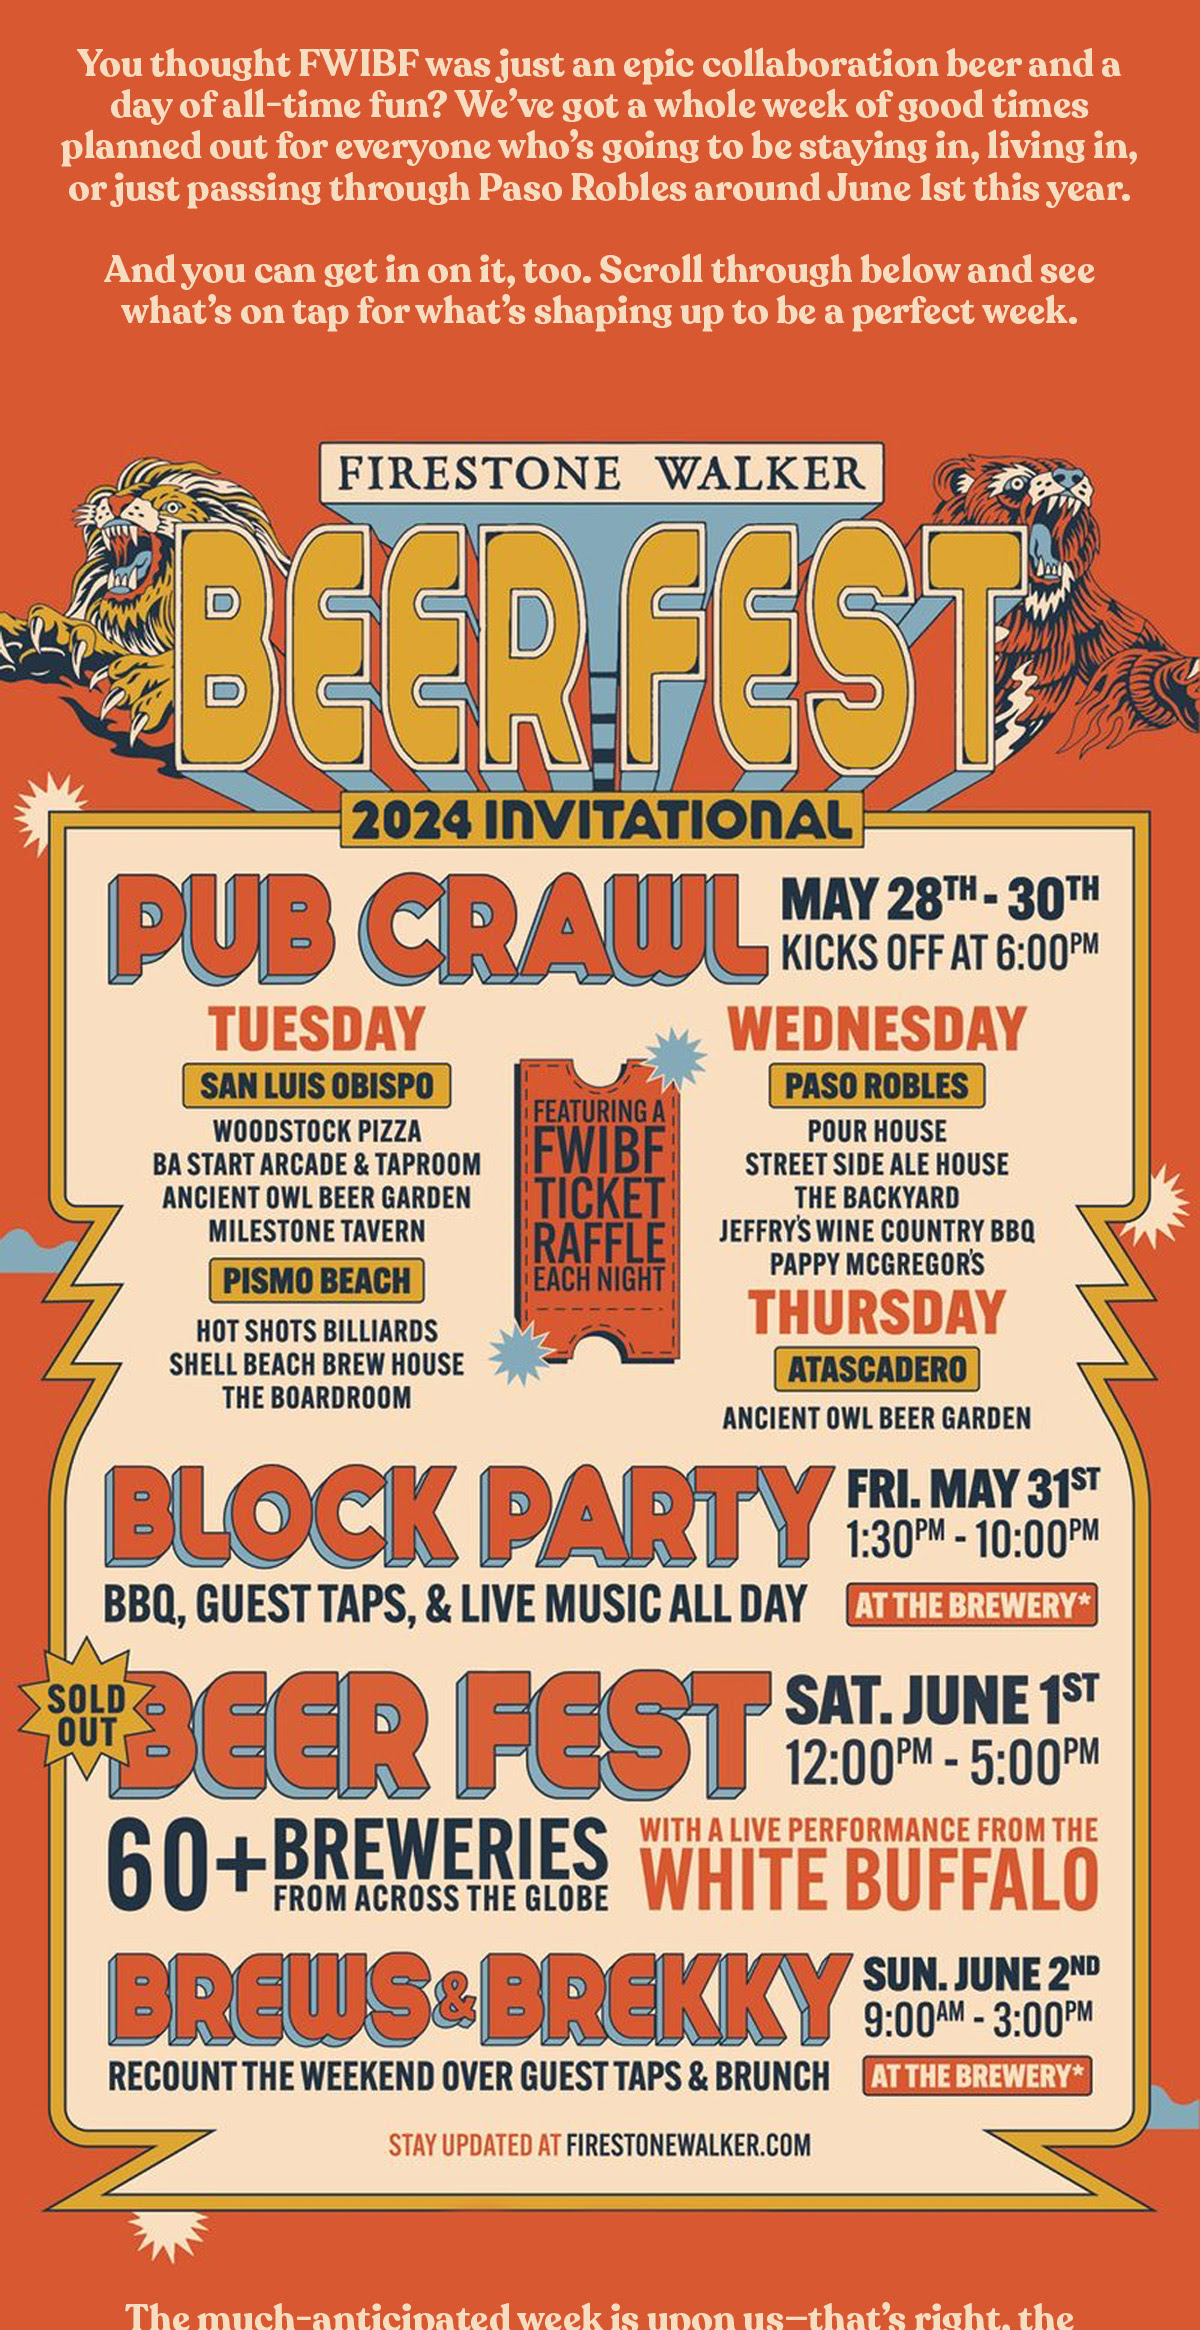 Paragraph reads, "The much-anticipated week is upon us—that’s right, the celebrations for Invitational 2024 are about to begin! We've got an exciting lineup ahead, starting with our daily Pub Crawl starting on Tuesday, May 28th, then our weekend kick-off with Block Fest on Friday May 31st, and so much more.   Whether you're a seasoned attendee or joining us for the first time, this year's Invitational is set to offer only the finest. Get all the details through the link below, and we hope to see all of you there!"